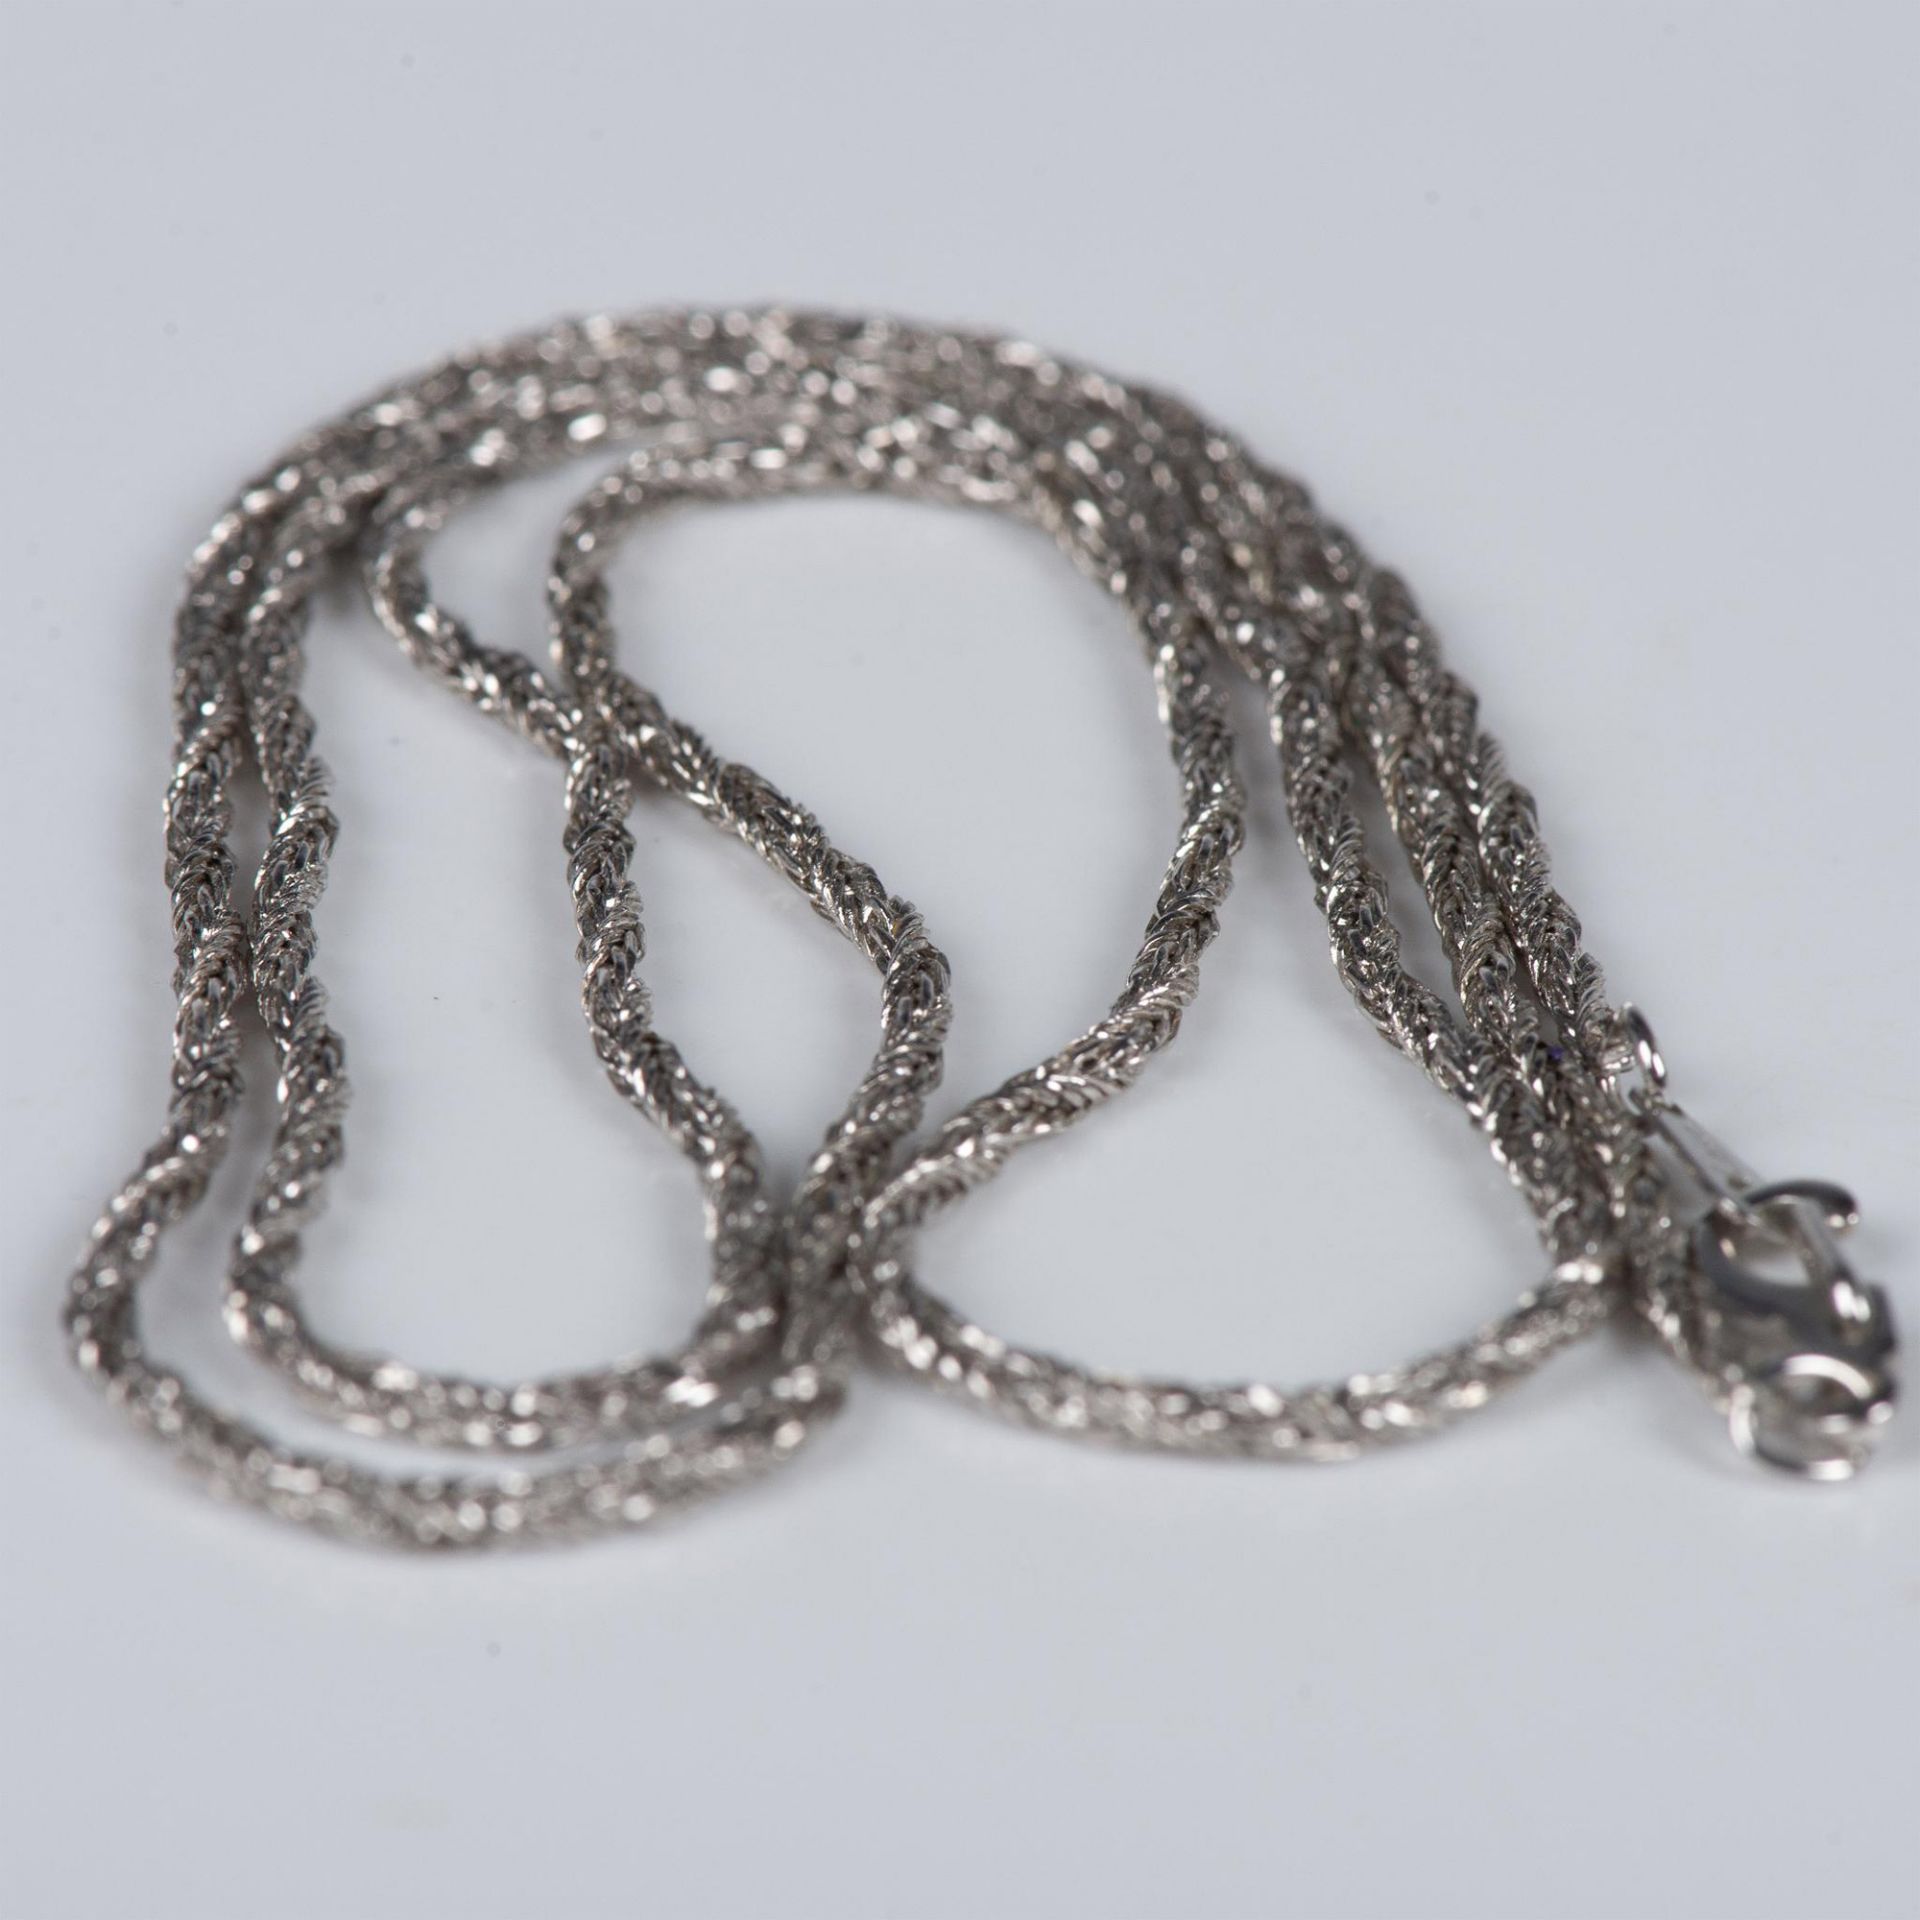 Long 14K White Gold Plated Rope Chain - Image 3 of 3